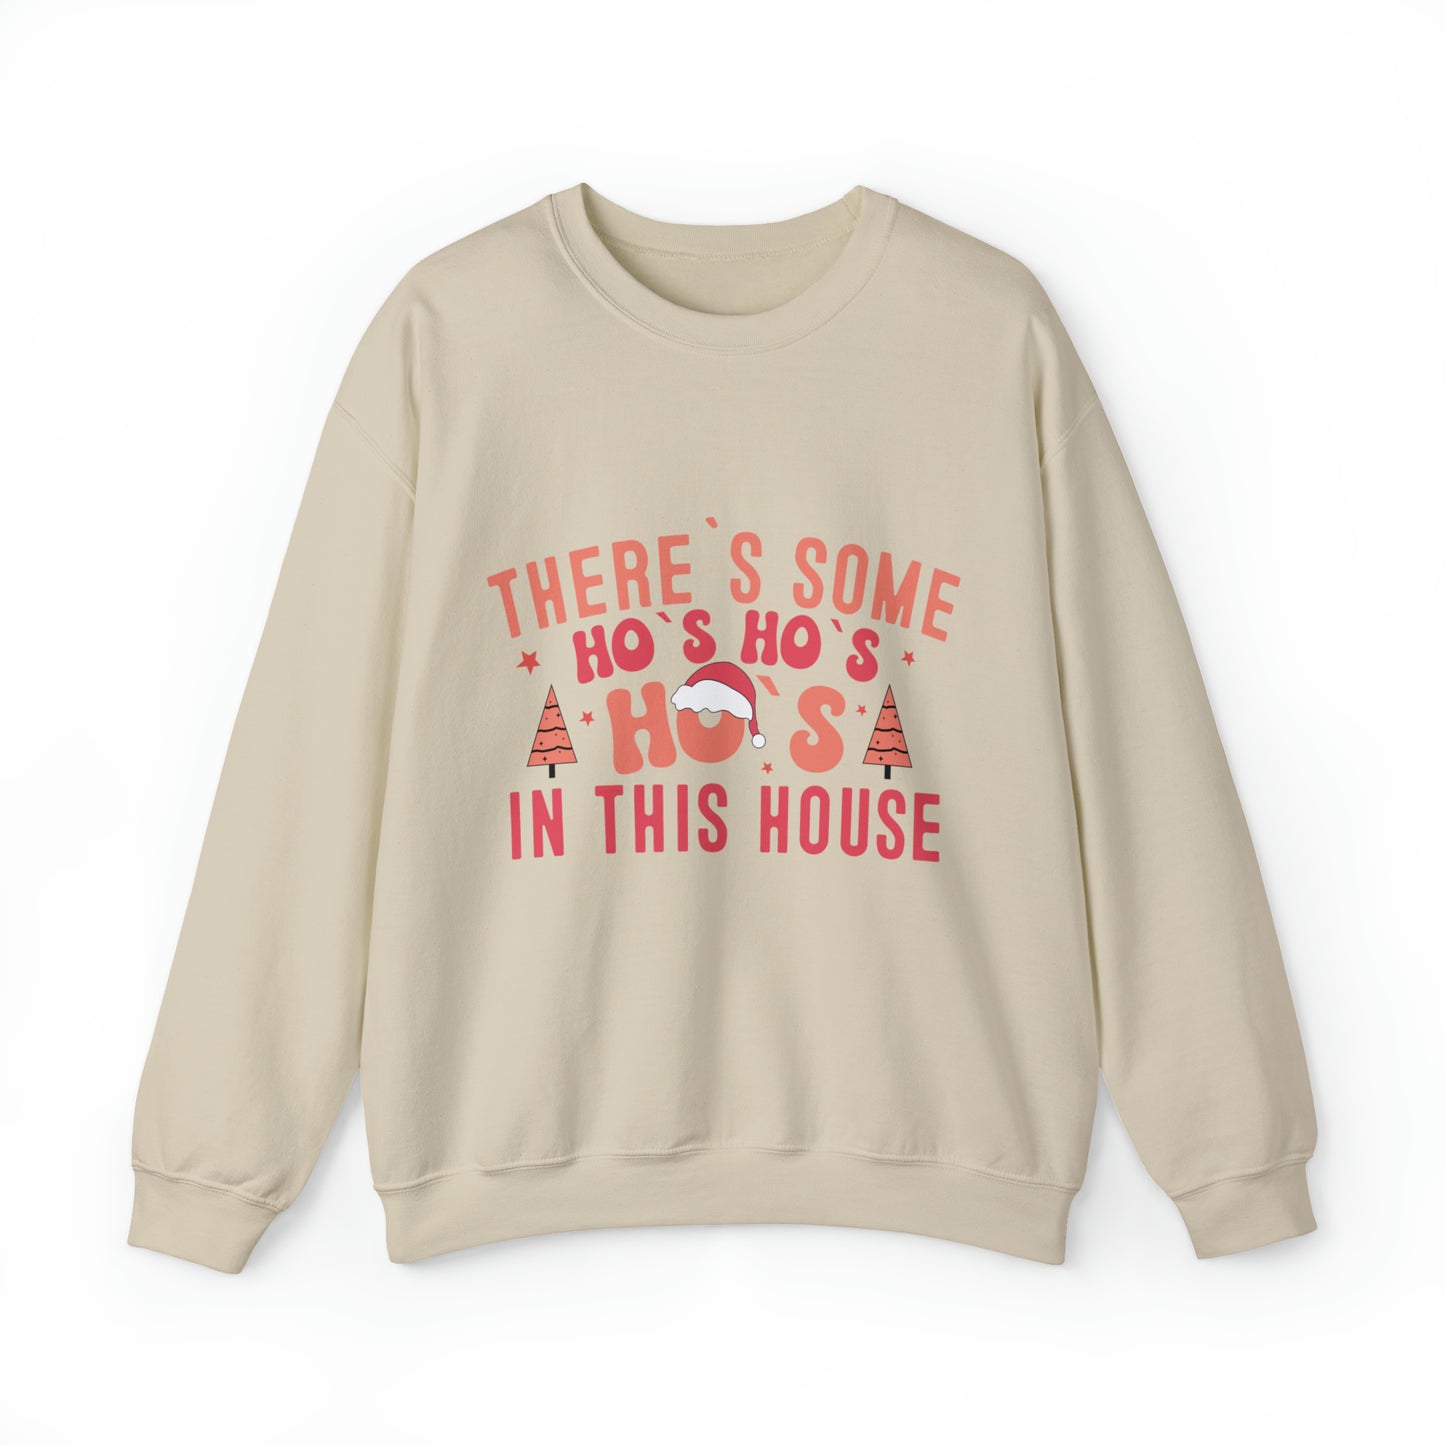 There's some HoHoHos in the house Women's funny Christmas humor Crewneck Sweatshirt